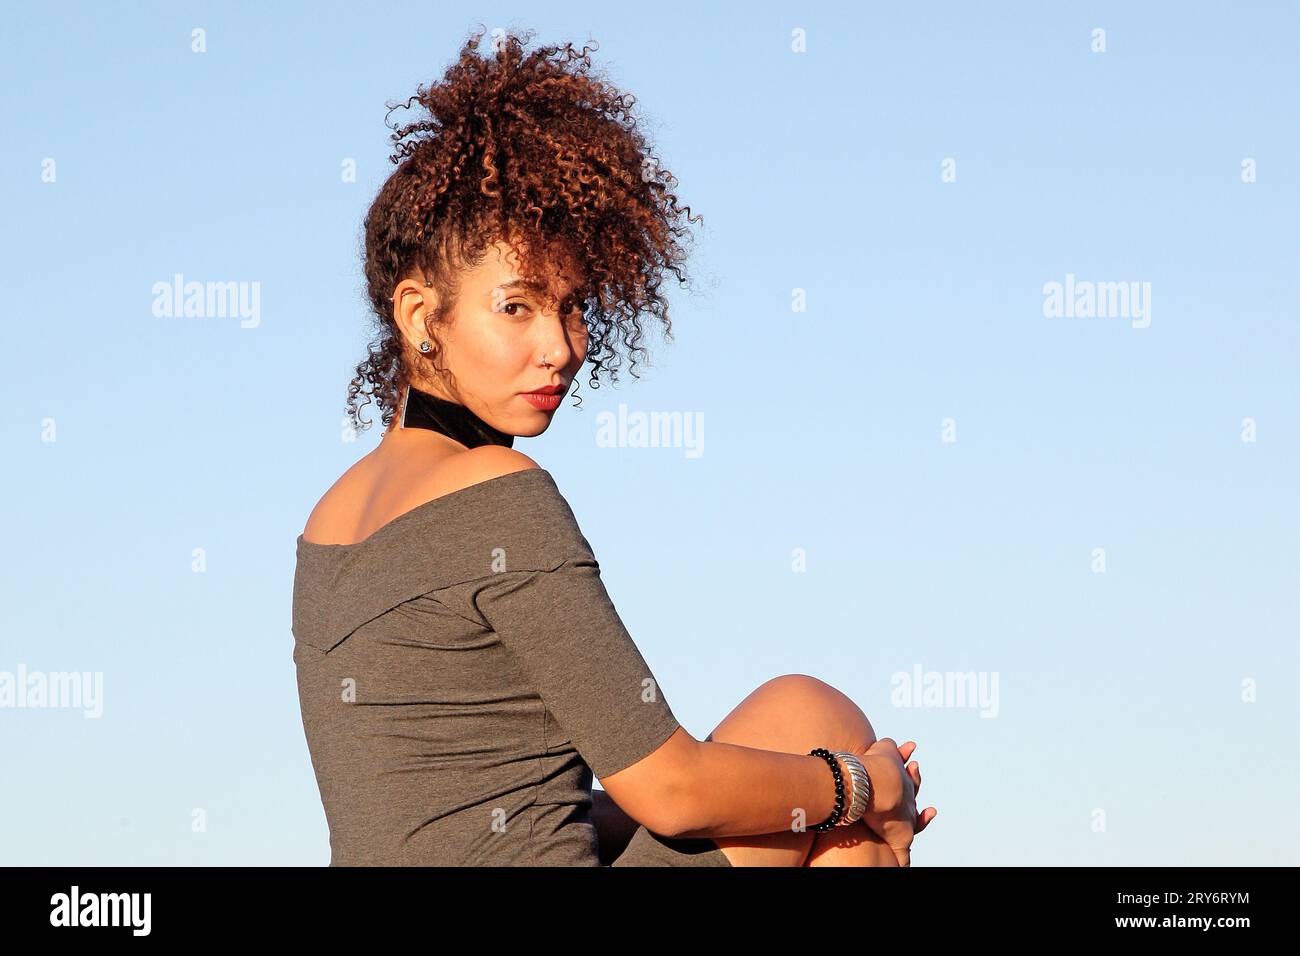 Curly hair woman in brown dress posing with blue sky in background Stock Photo